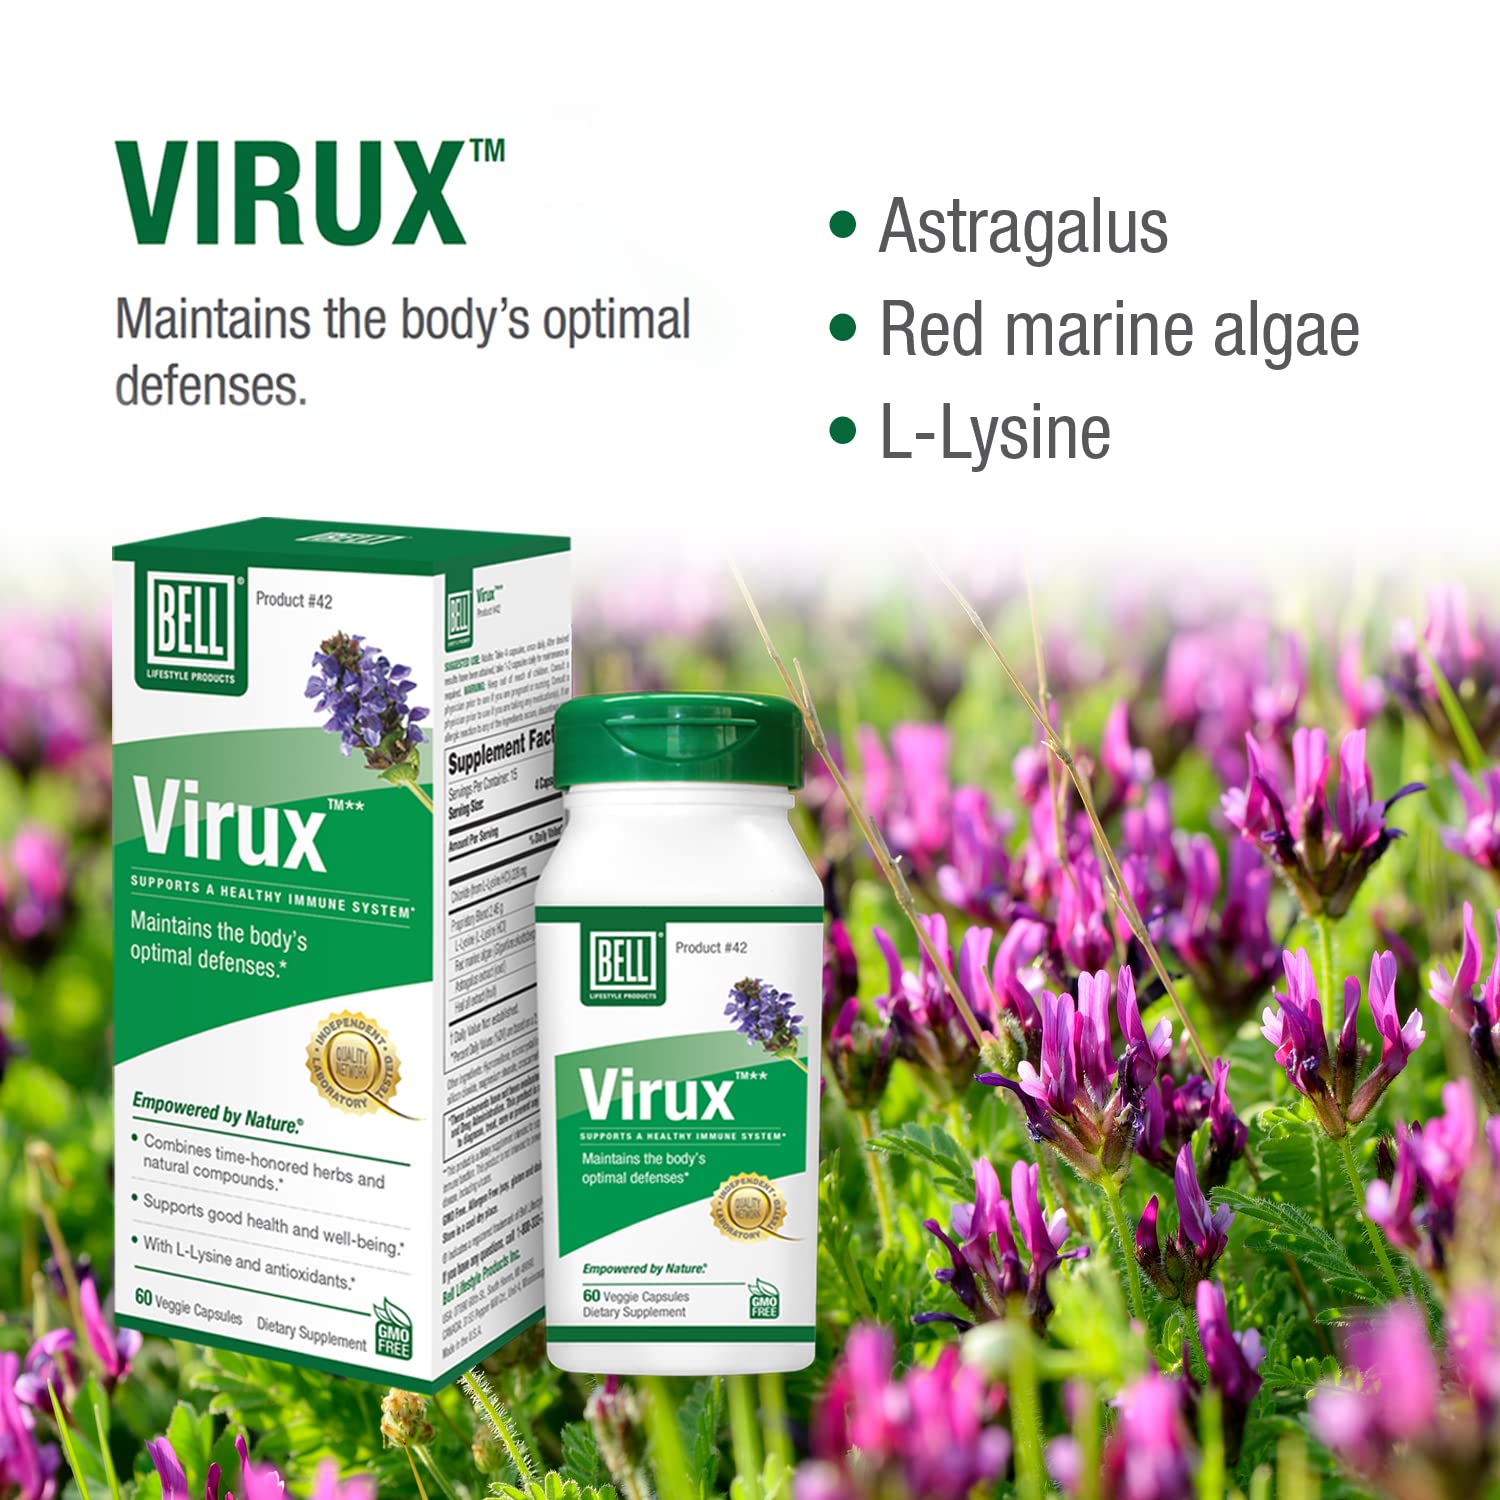 Bell Bundle - Virux L Lysine & Stem Cell Supplements - 25 Years Around The World, Sold Directly by The Manufacturer